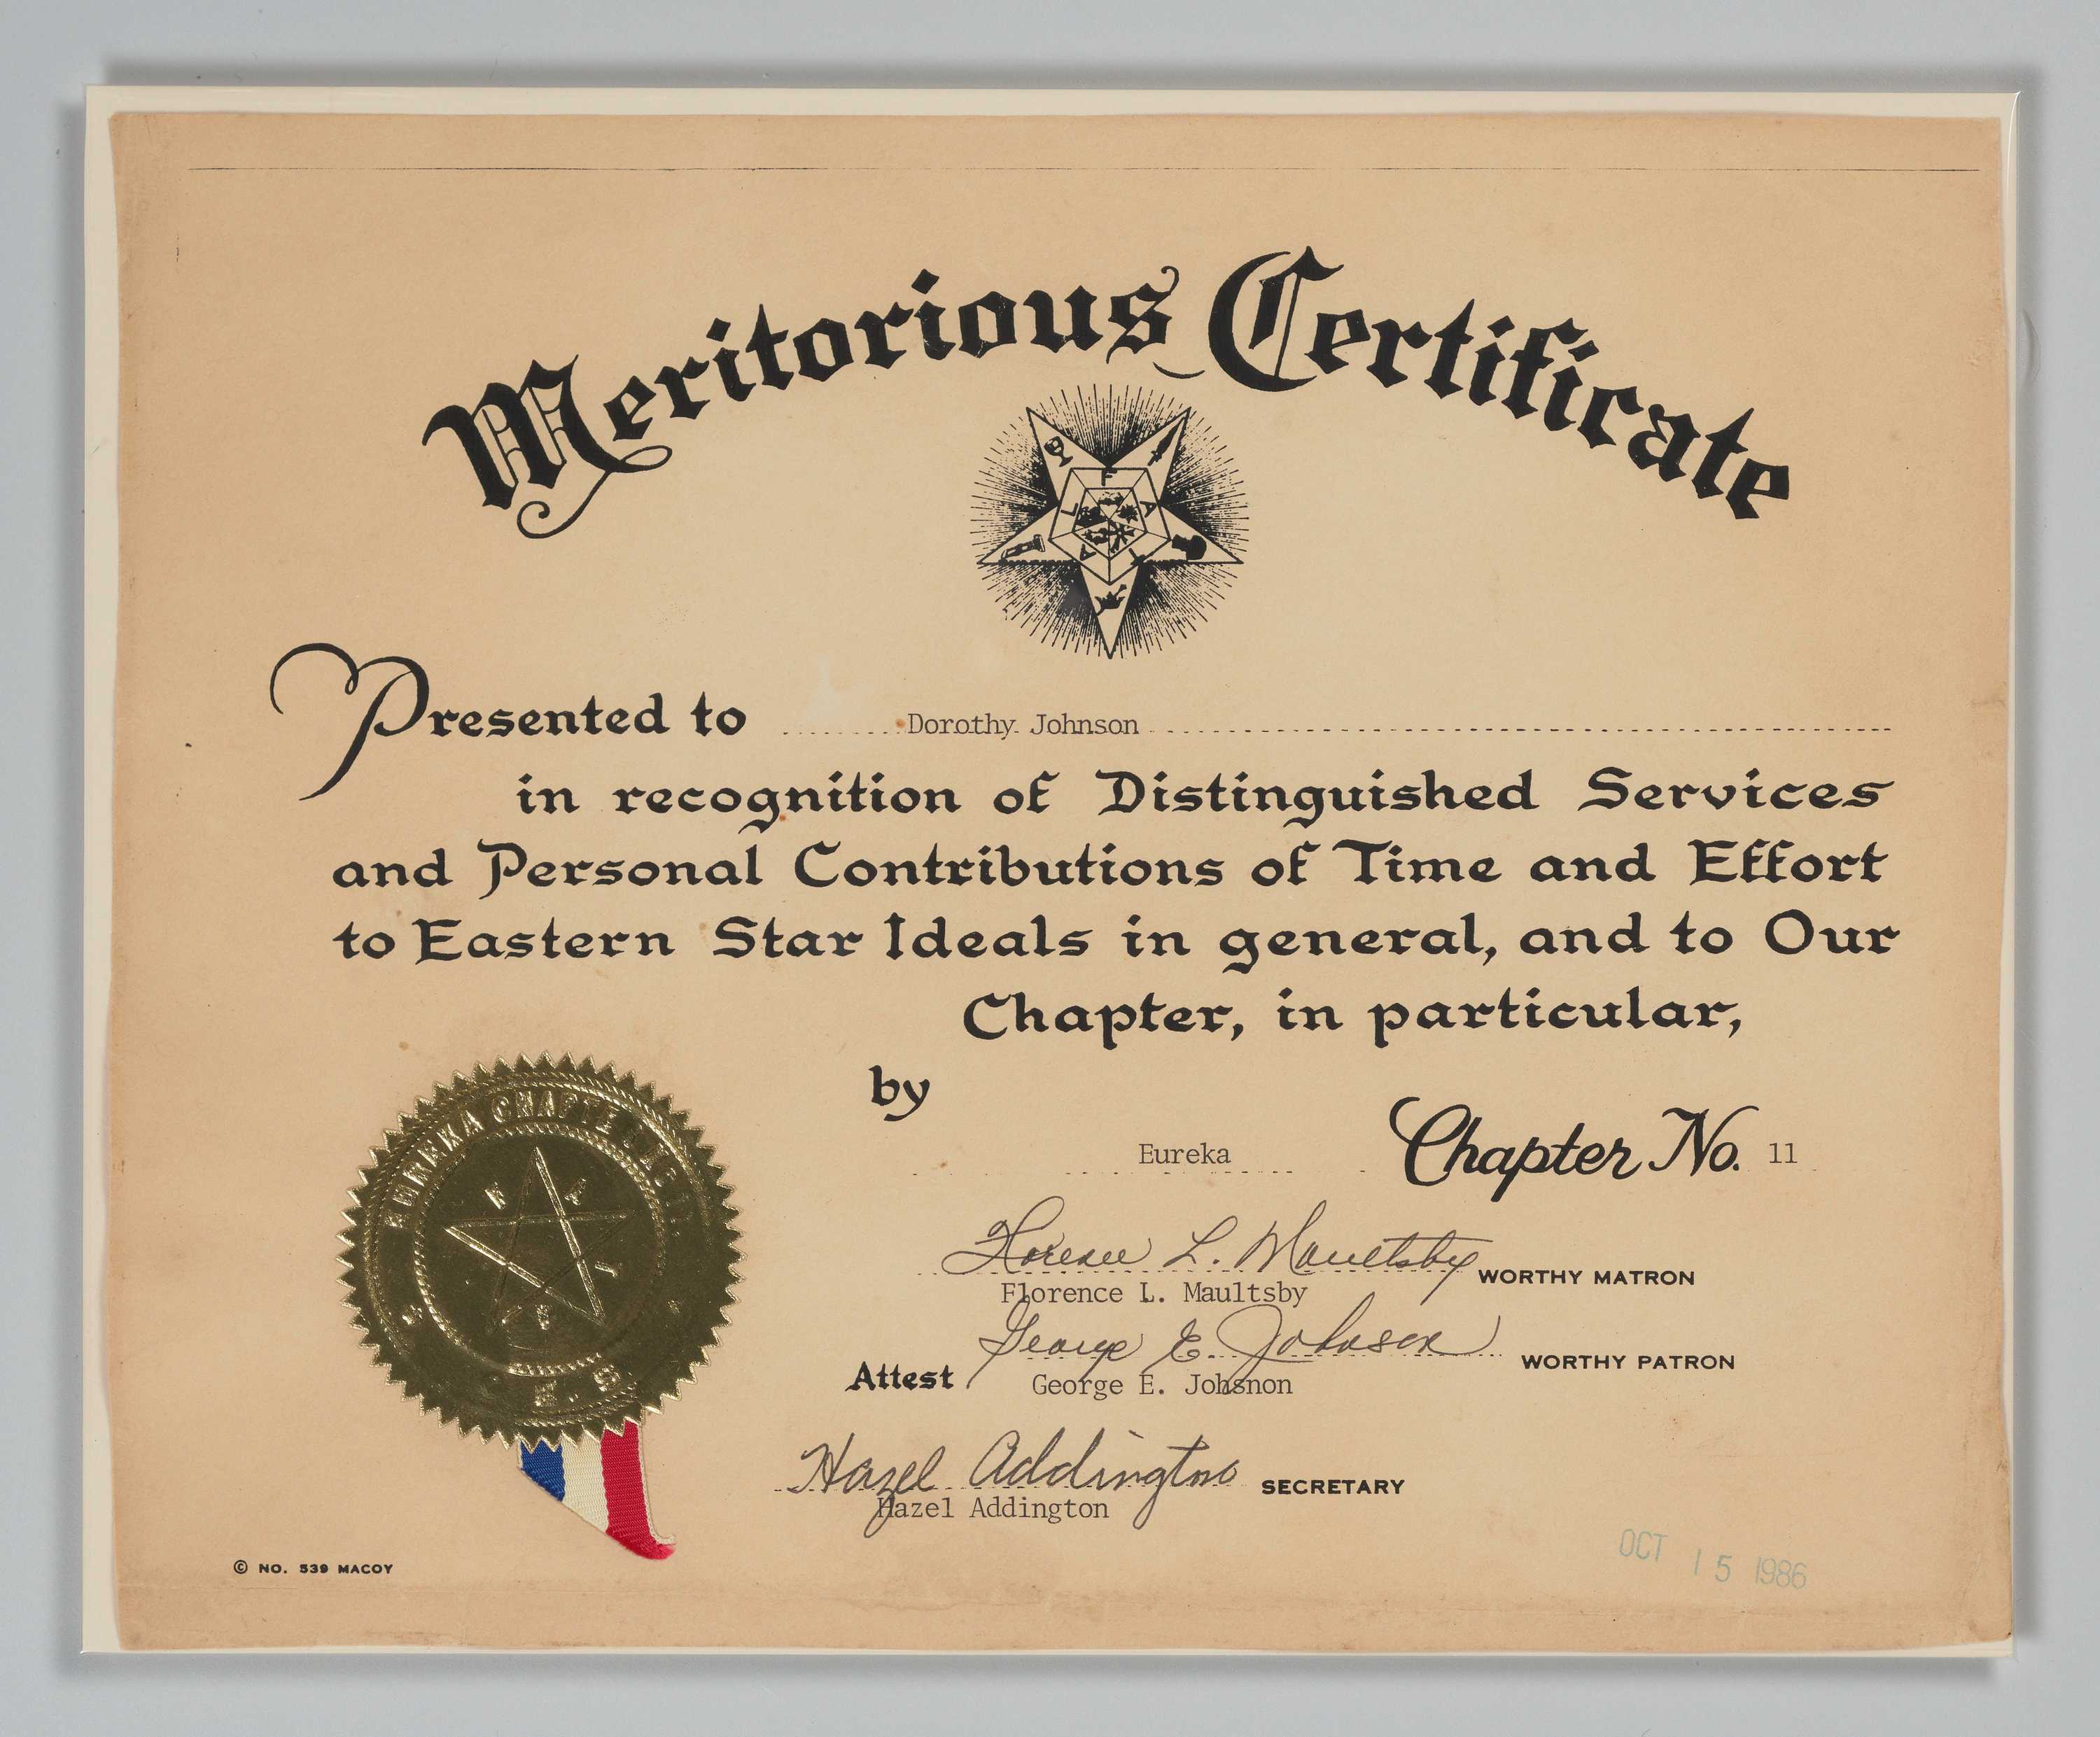 Certificate presented to Dorothy Johnson "in recognition of her distinguished services and personal contributions of time and effort" to the Order of the Eastern Star and to the Eureka Chapter No.11.